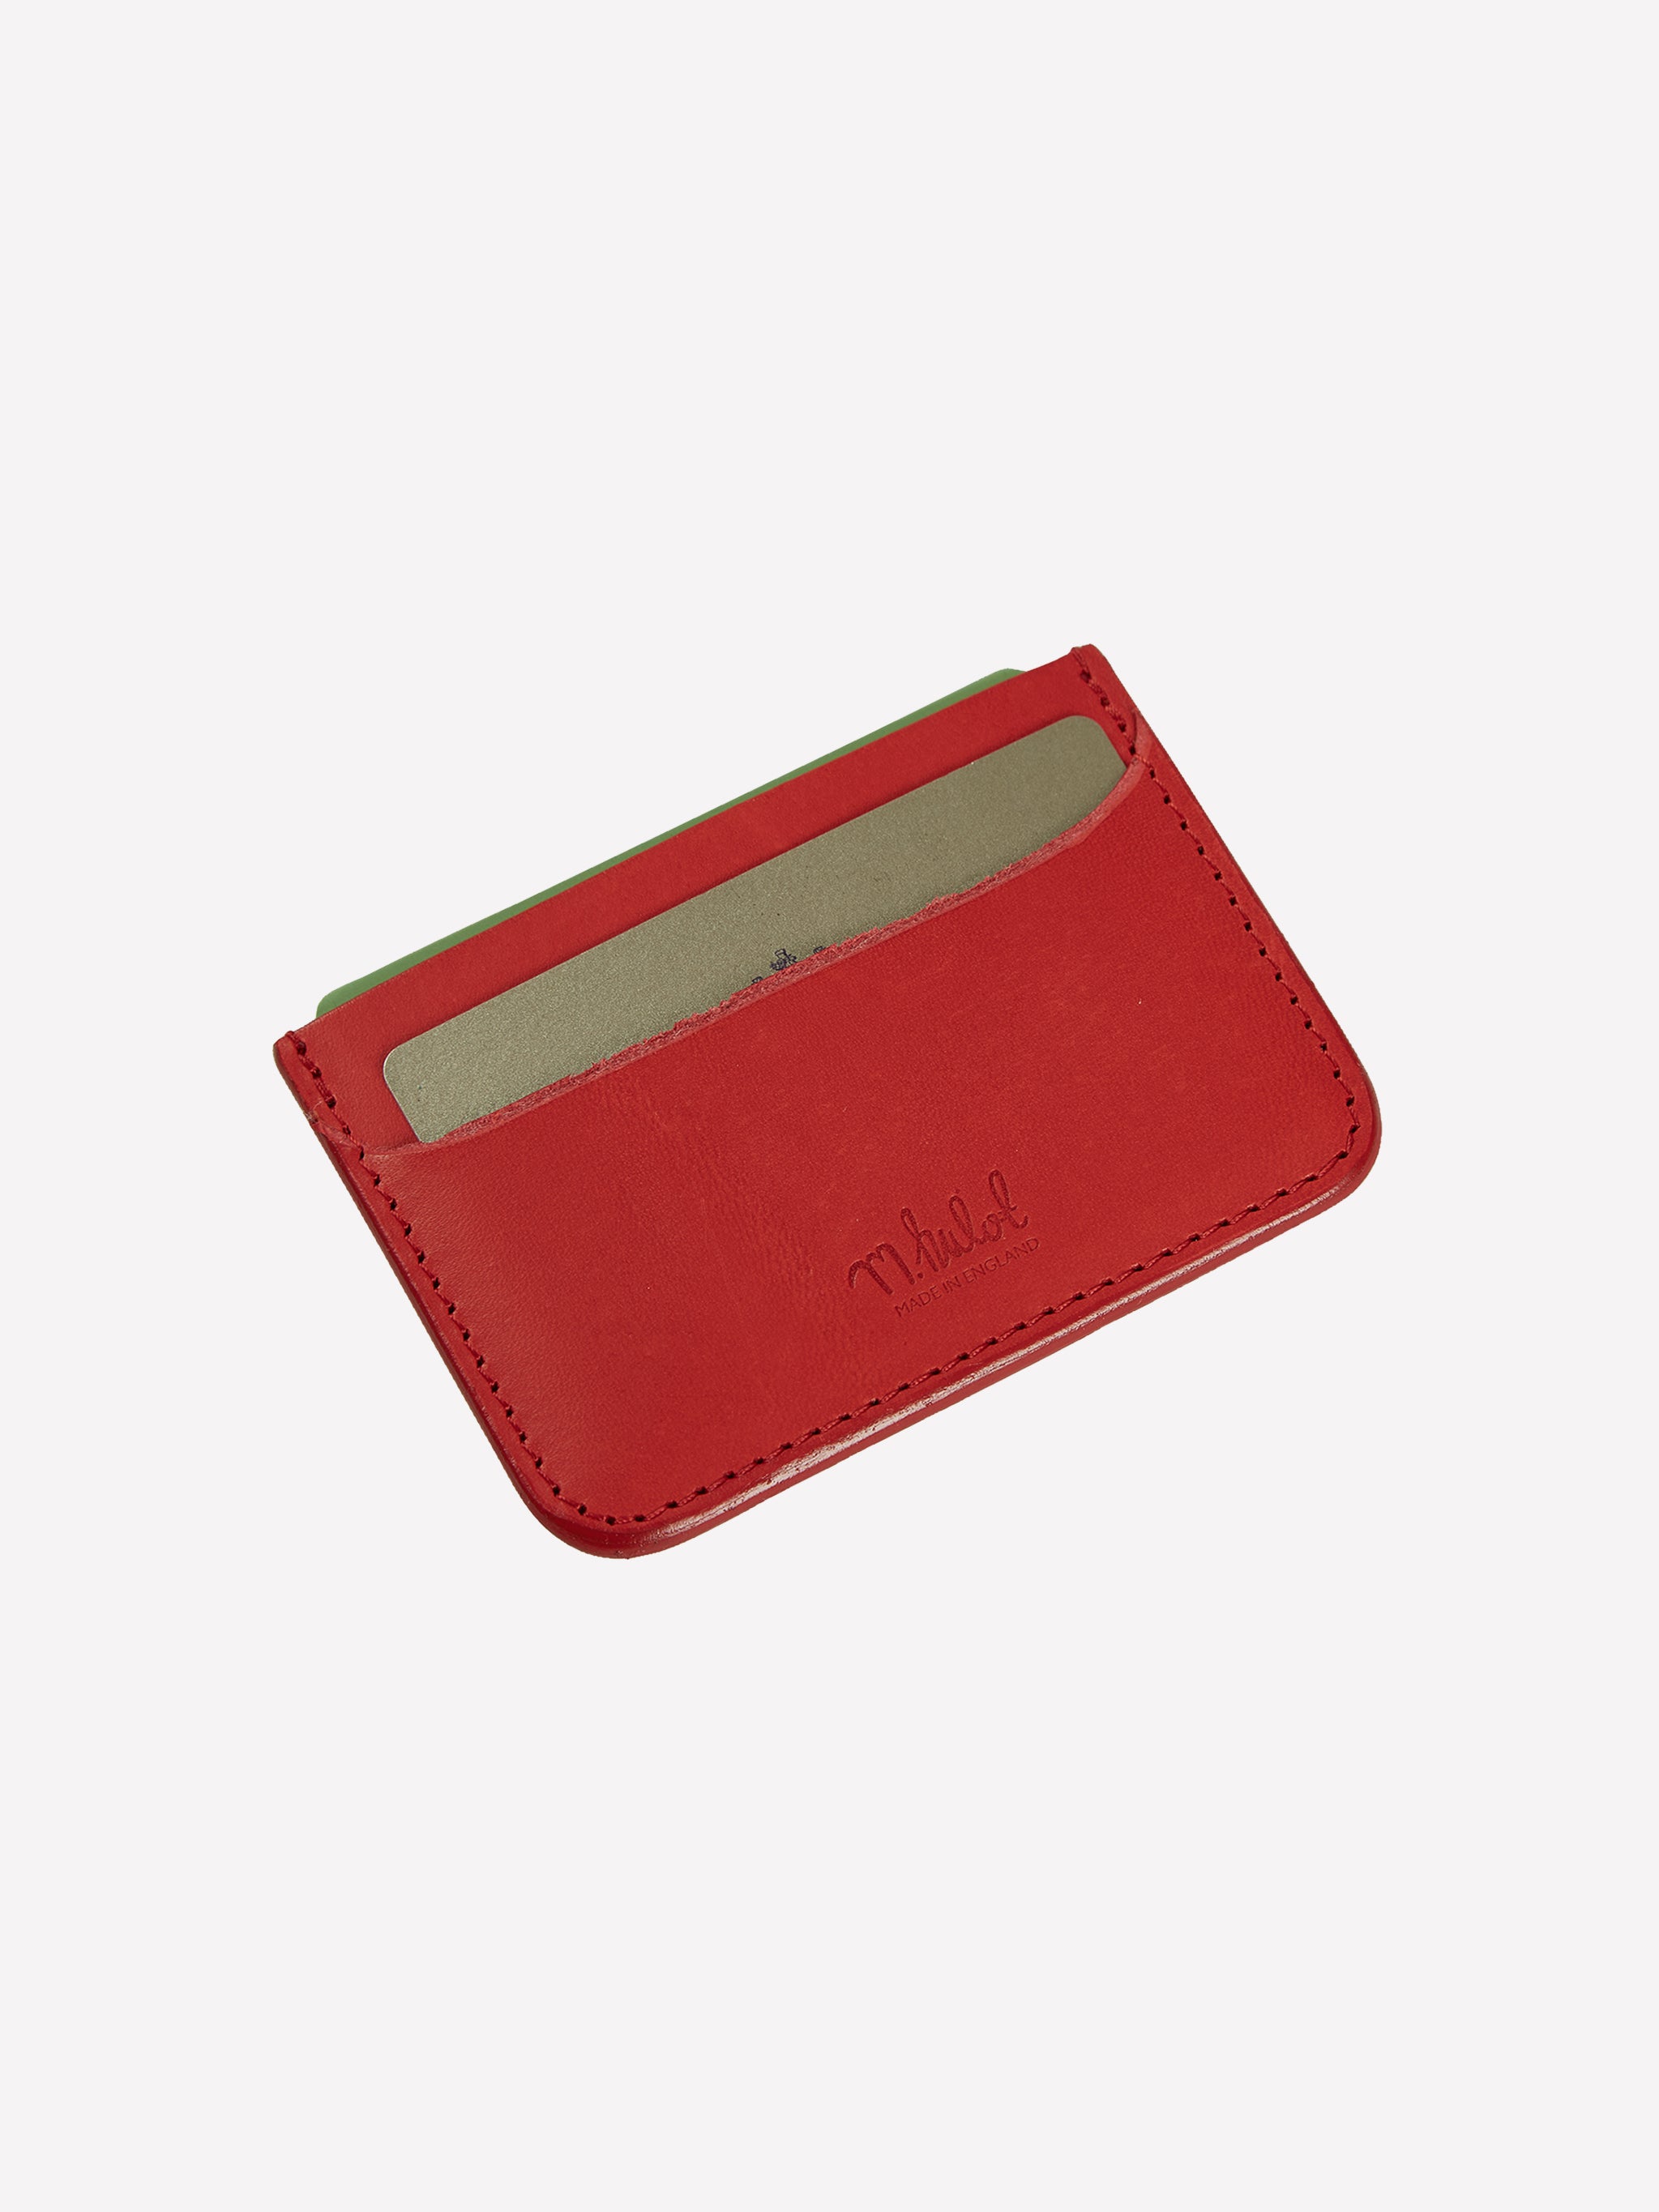 Socon Crafted Leather Cardholder - Flame Red